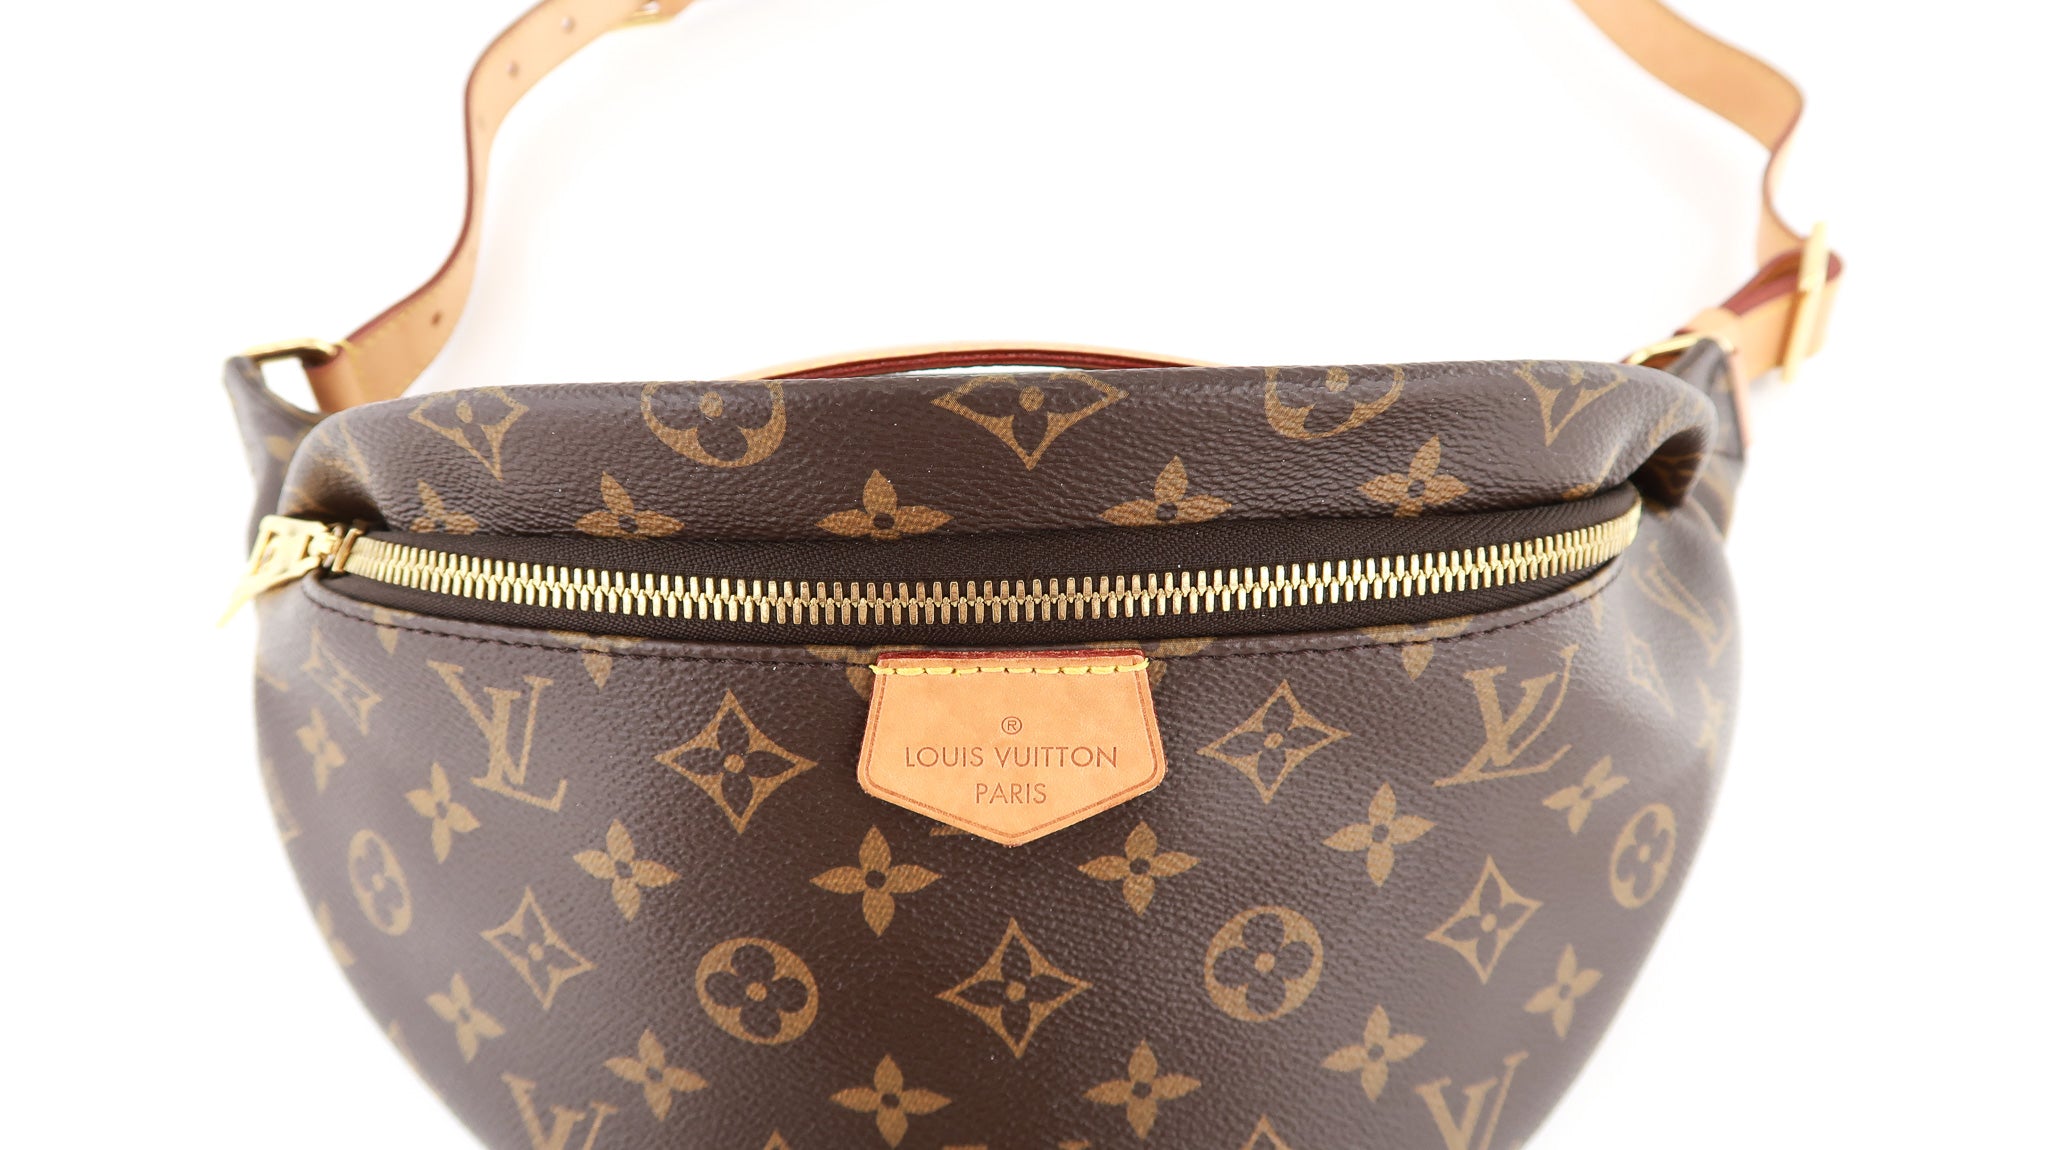 Thoughts on the new bum bag? : r/Louisvuitton